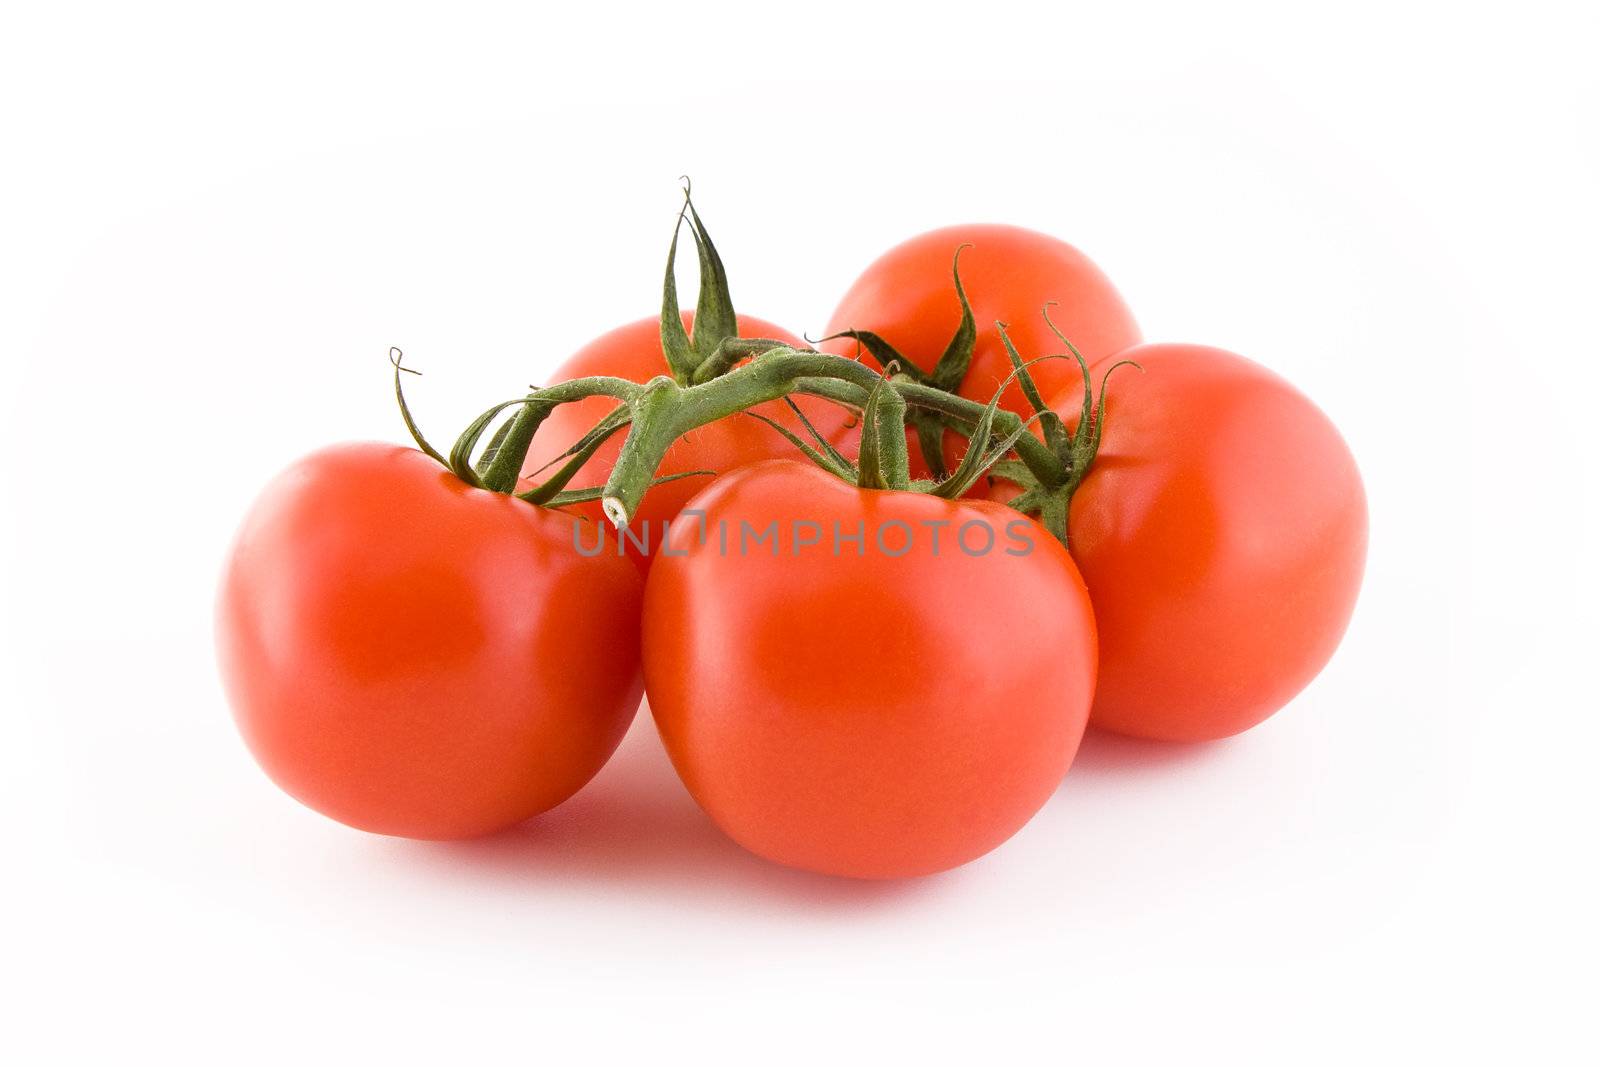 Bunch of fresh tomatoes isolated on white background, vegetables